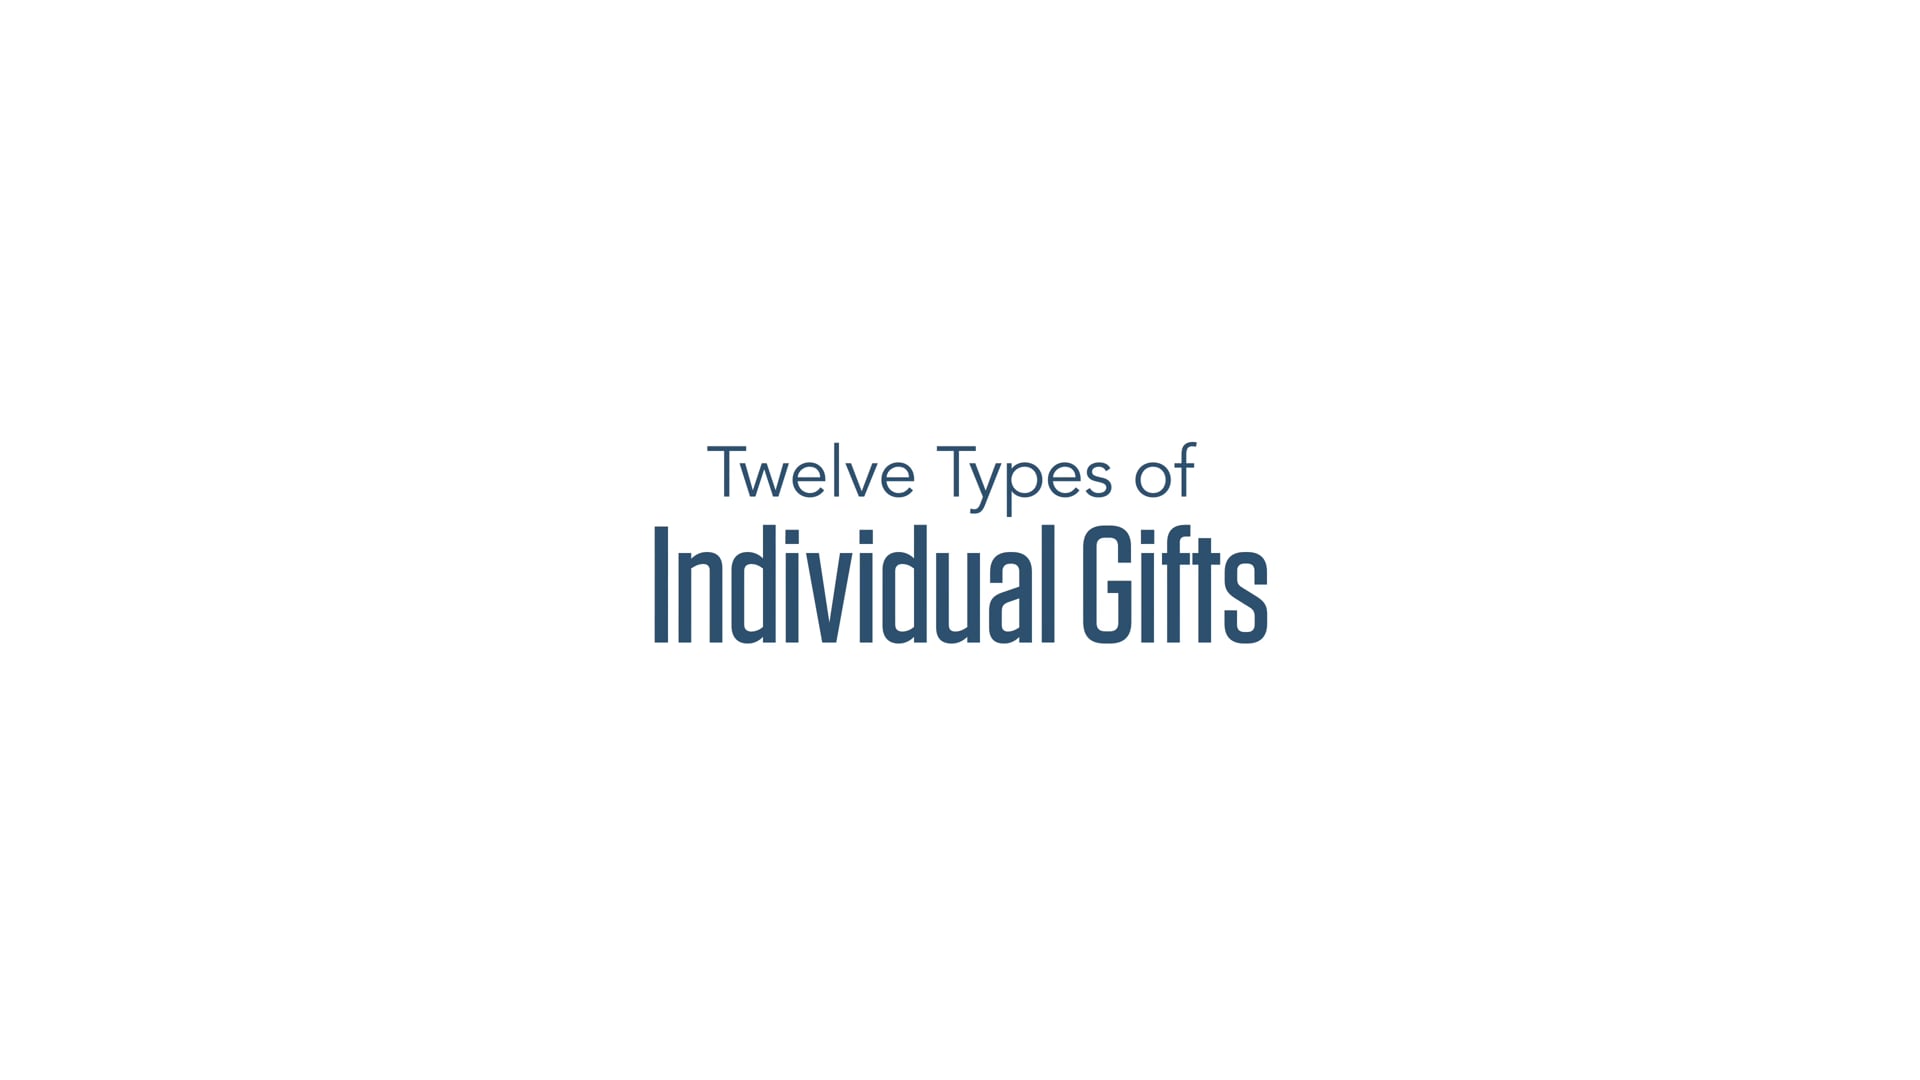 Twelve Types of Individual Gifts